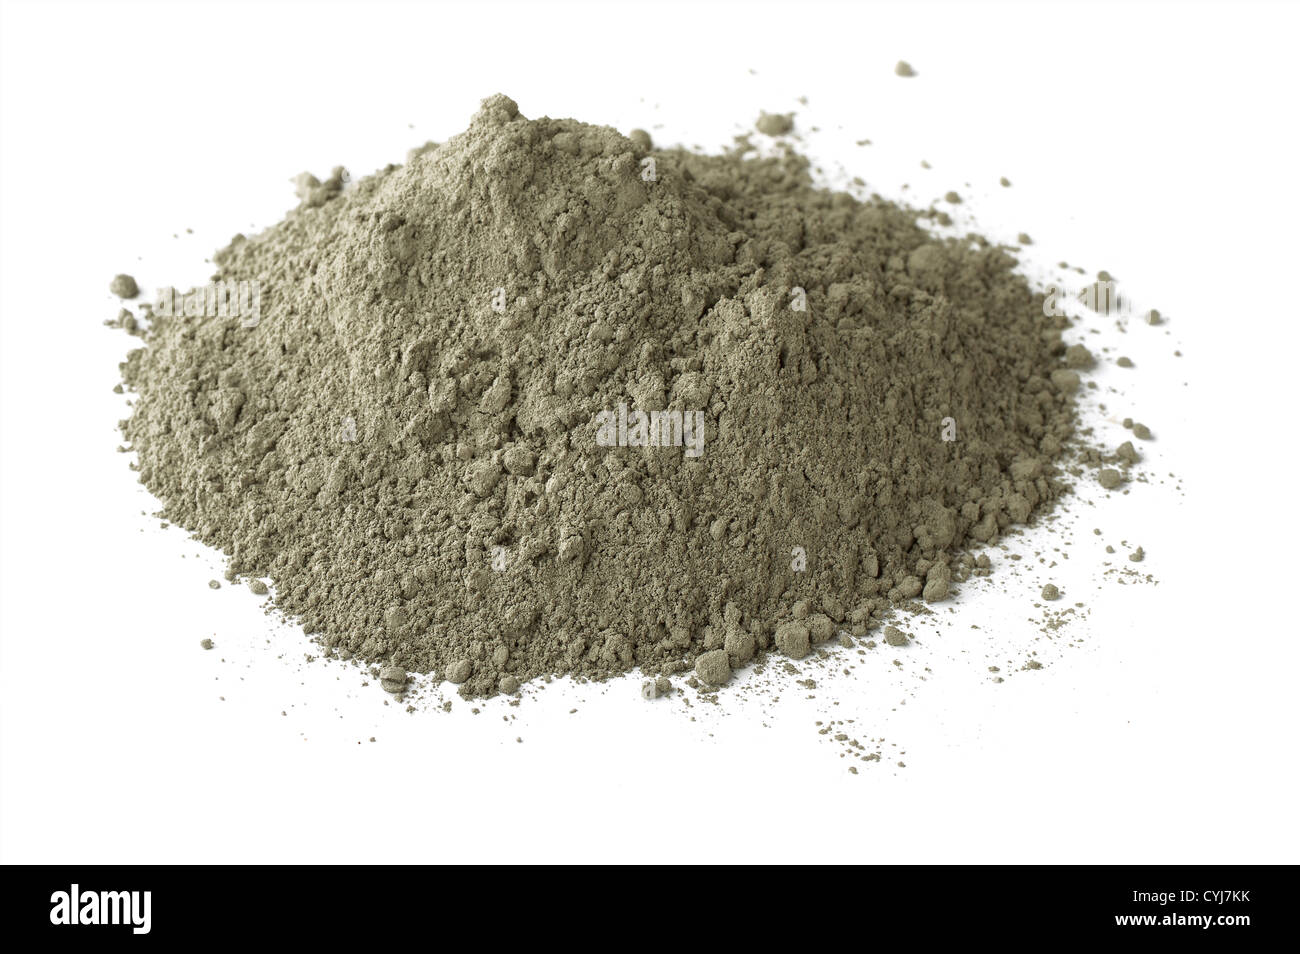 Pile of dry grey portland cement isolated on white Stock Photo